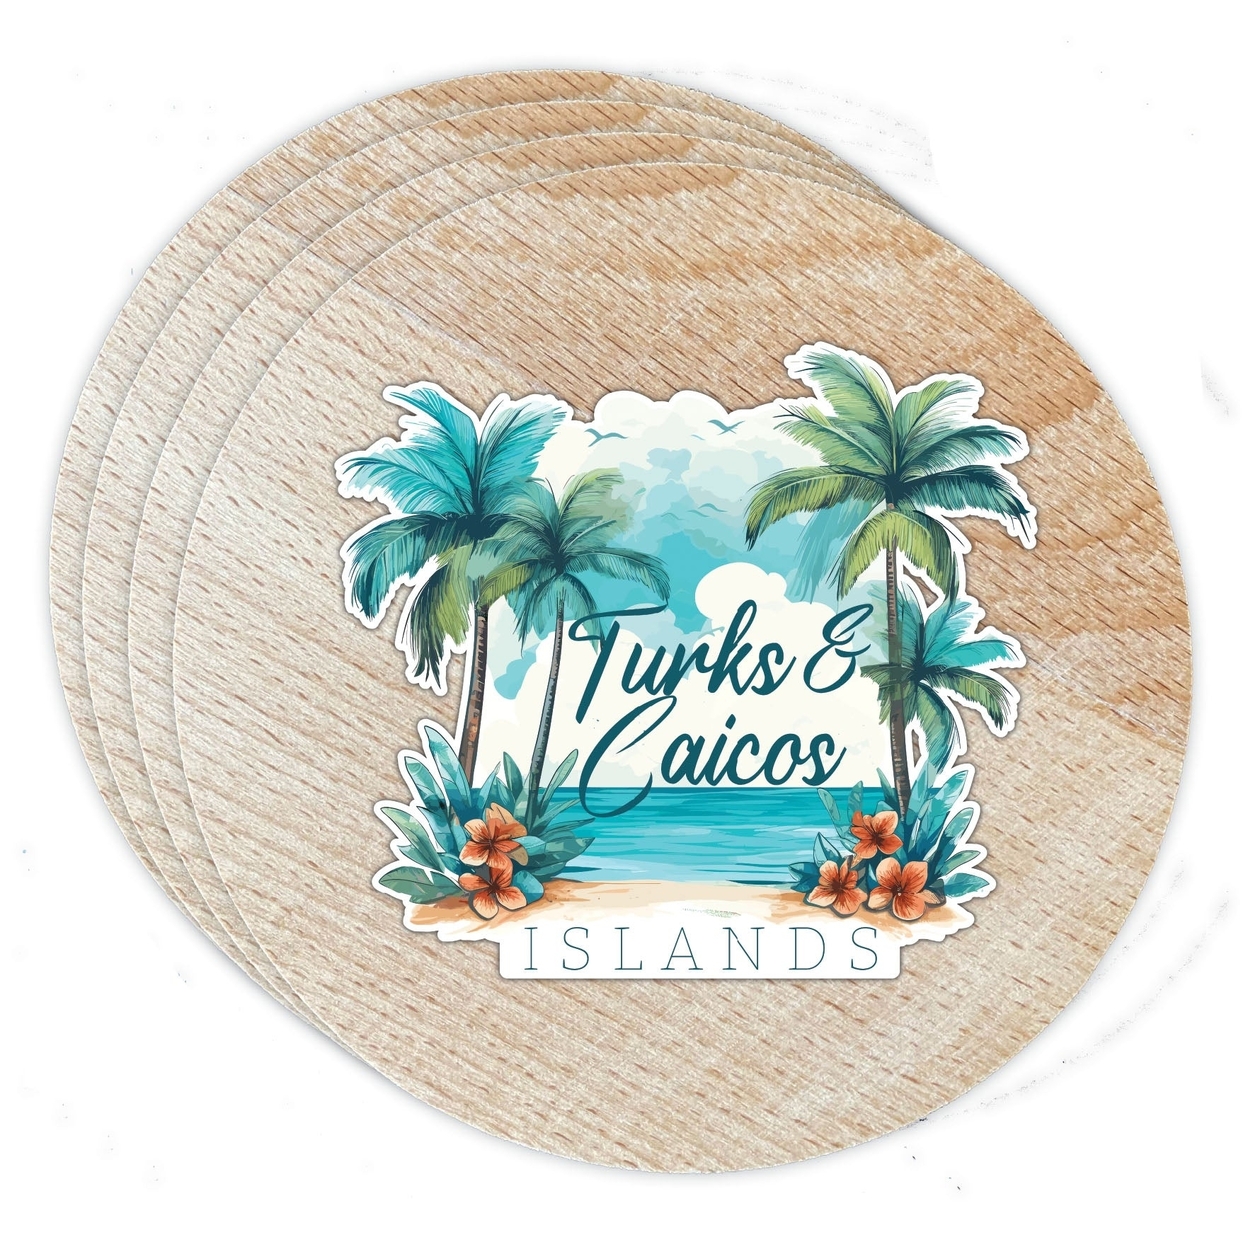 Turks And Caicos Design C Souvenir Coaster Wooden 3.5 X 3.5-Inch 4 Pack